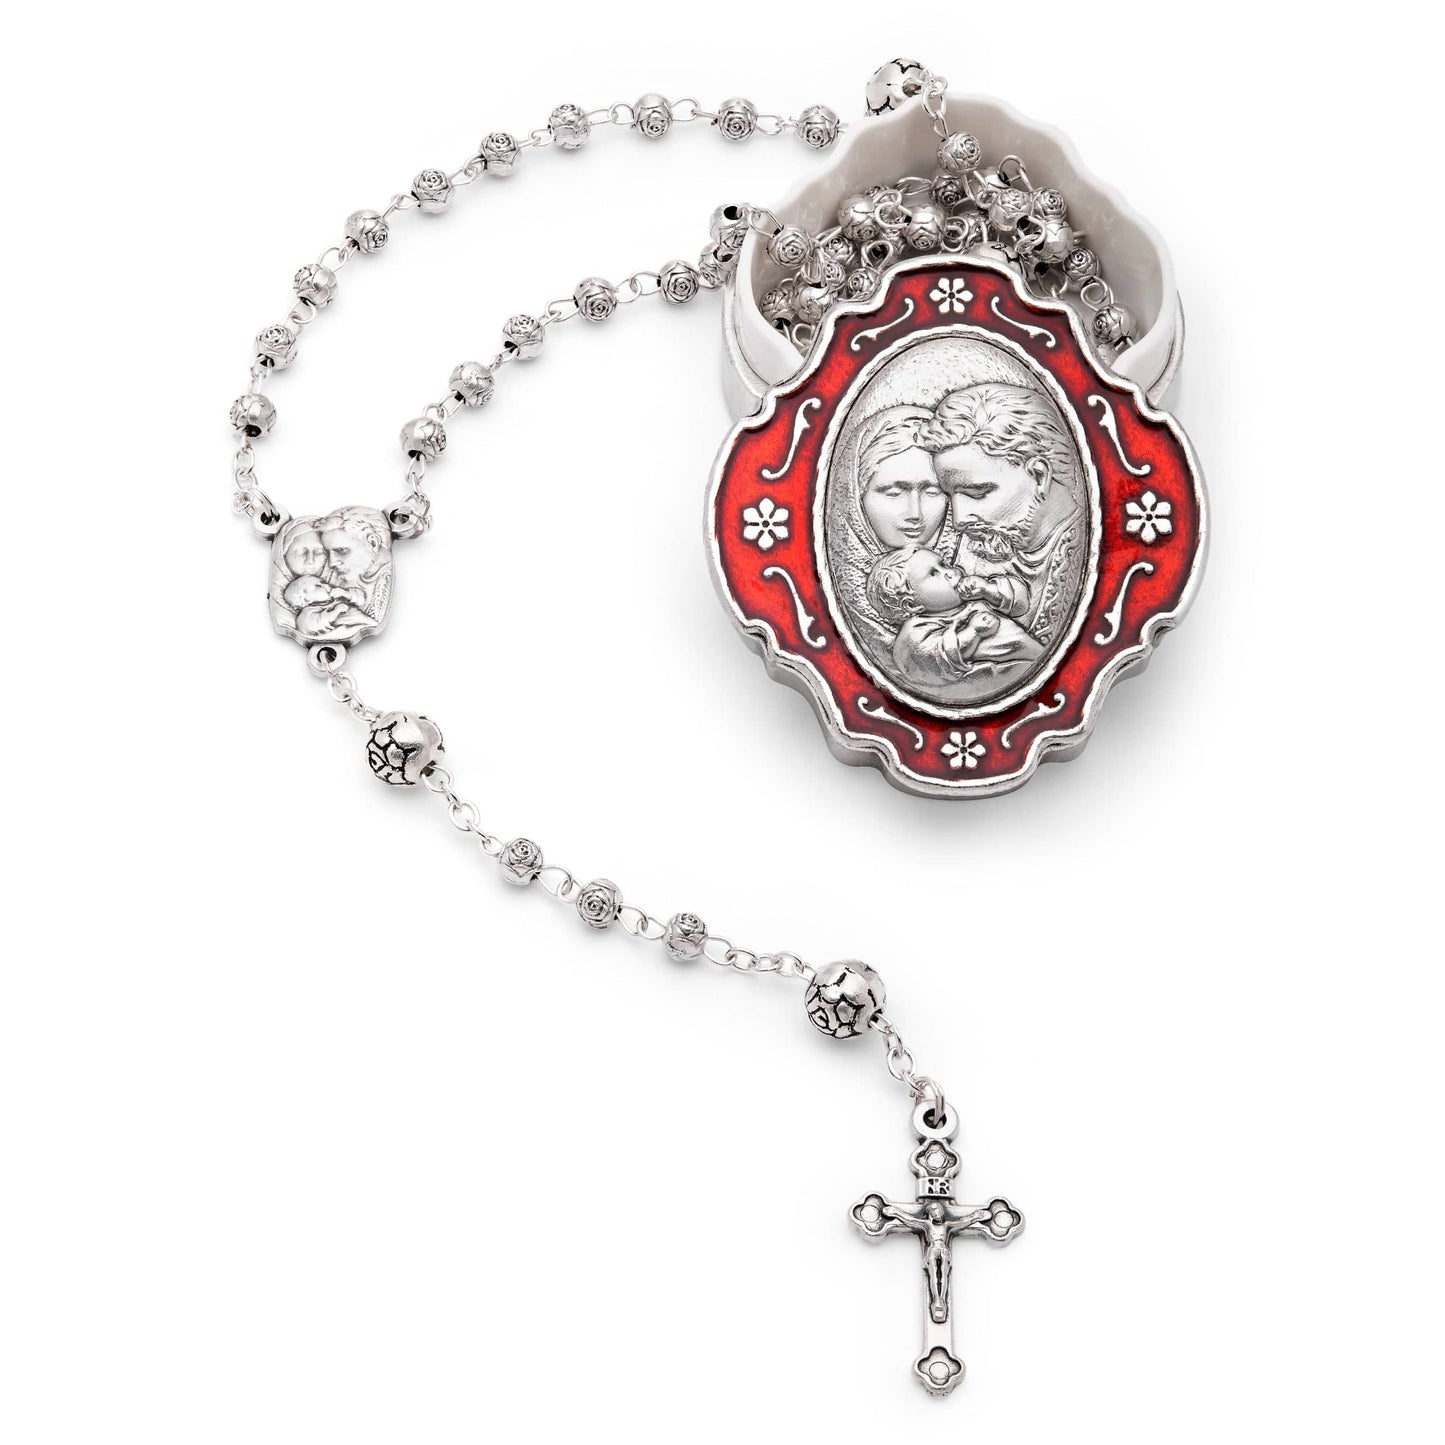 MONDO CATTOLICO Prayer Beads 37 cm (14.56 in) / 4 mm (0.15 in) Red Keepsake Case and Rosary of the Holy Family